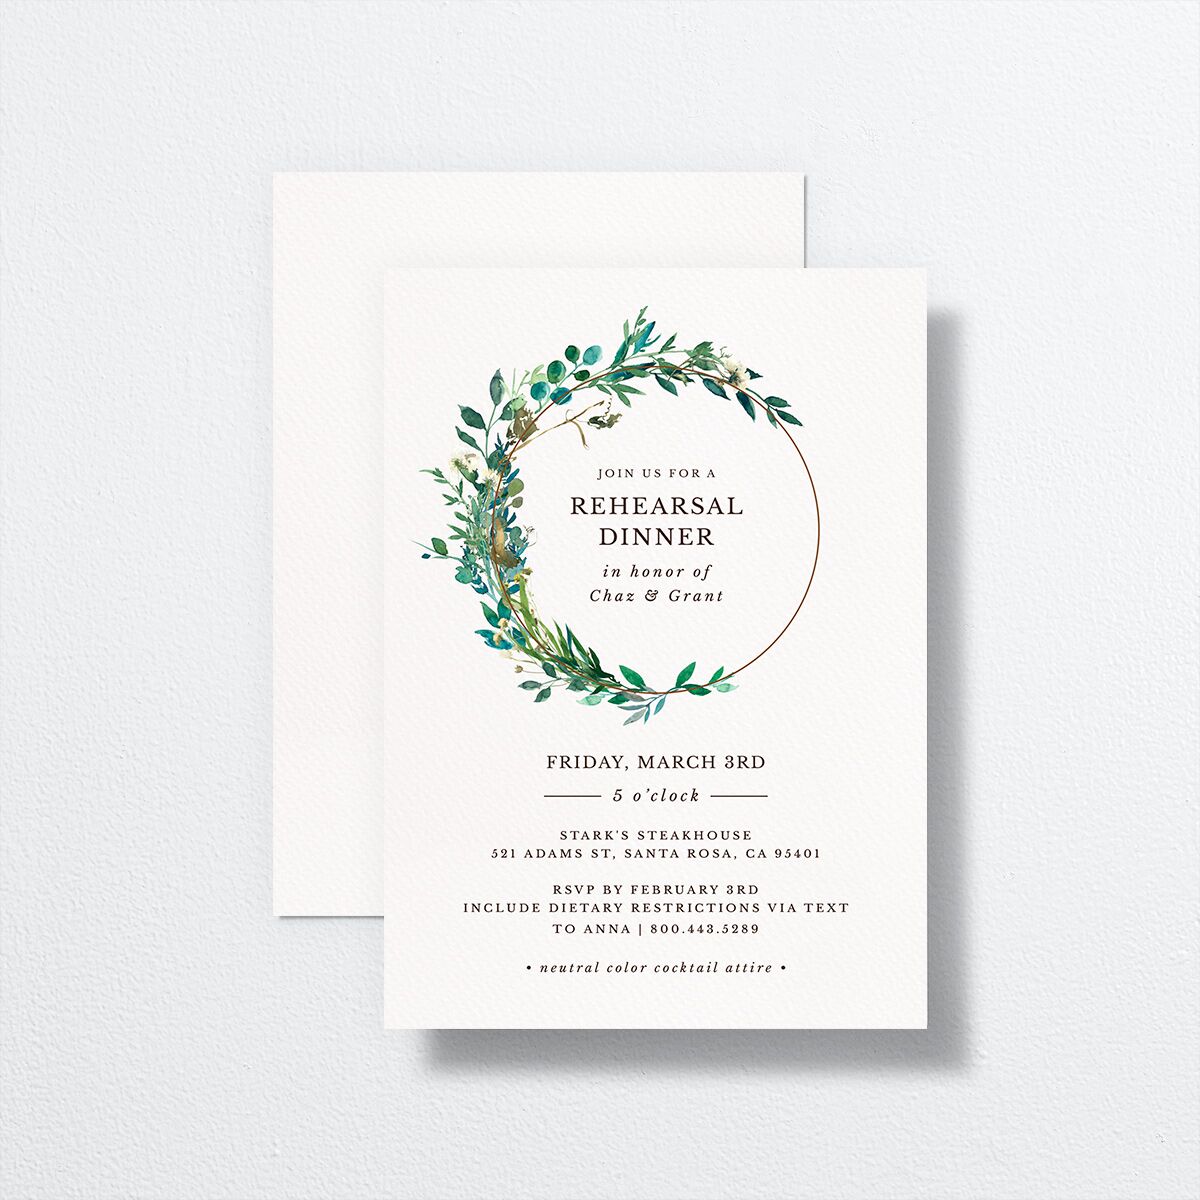 Leafy Hoops Rehearsal Dinner Invitations front-and-back in Green